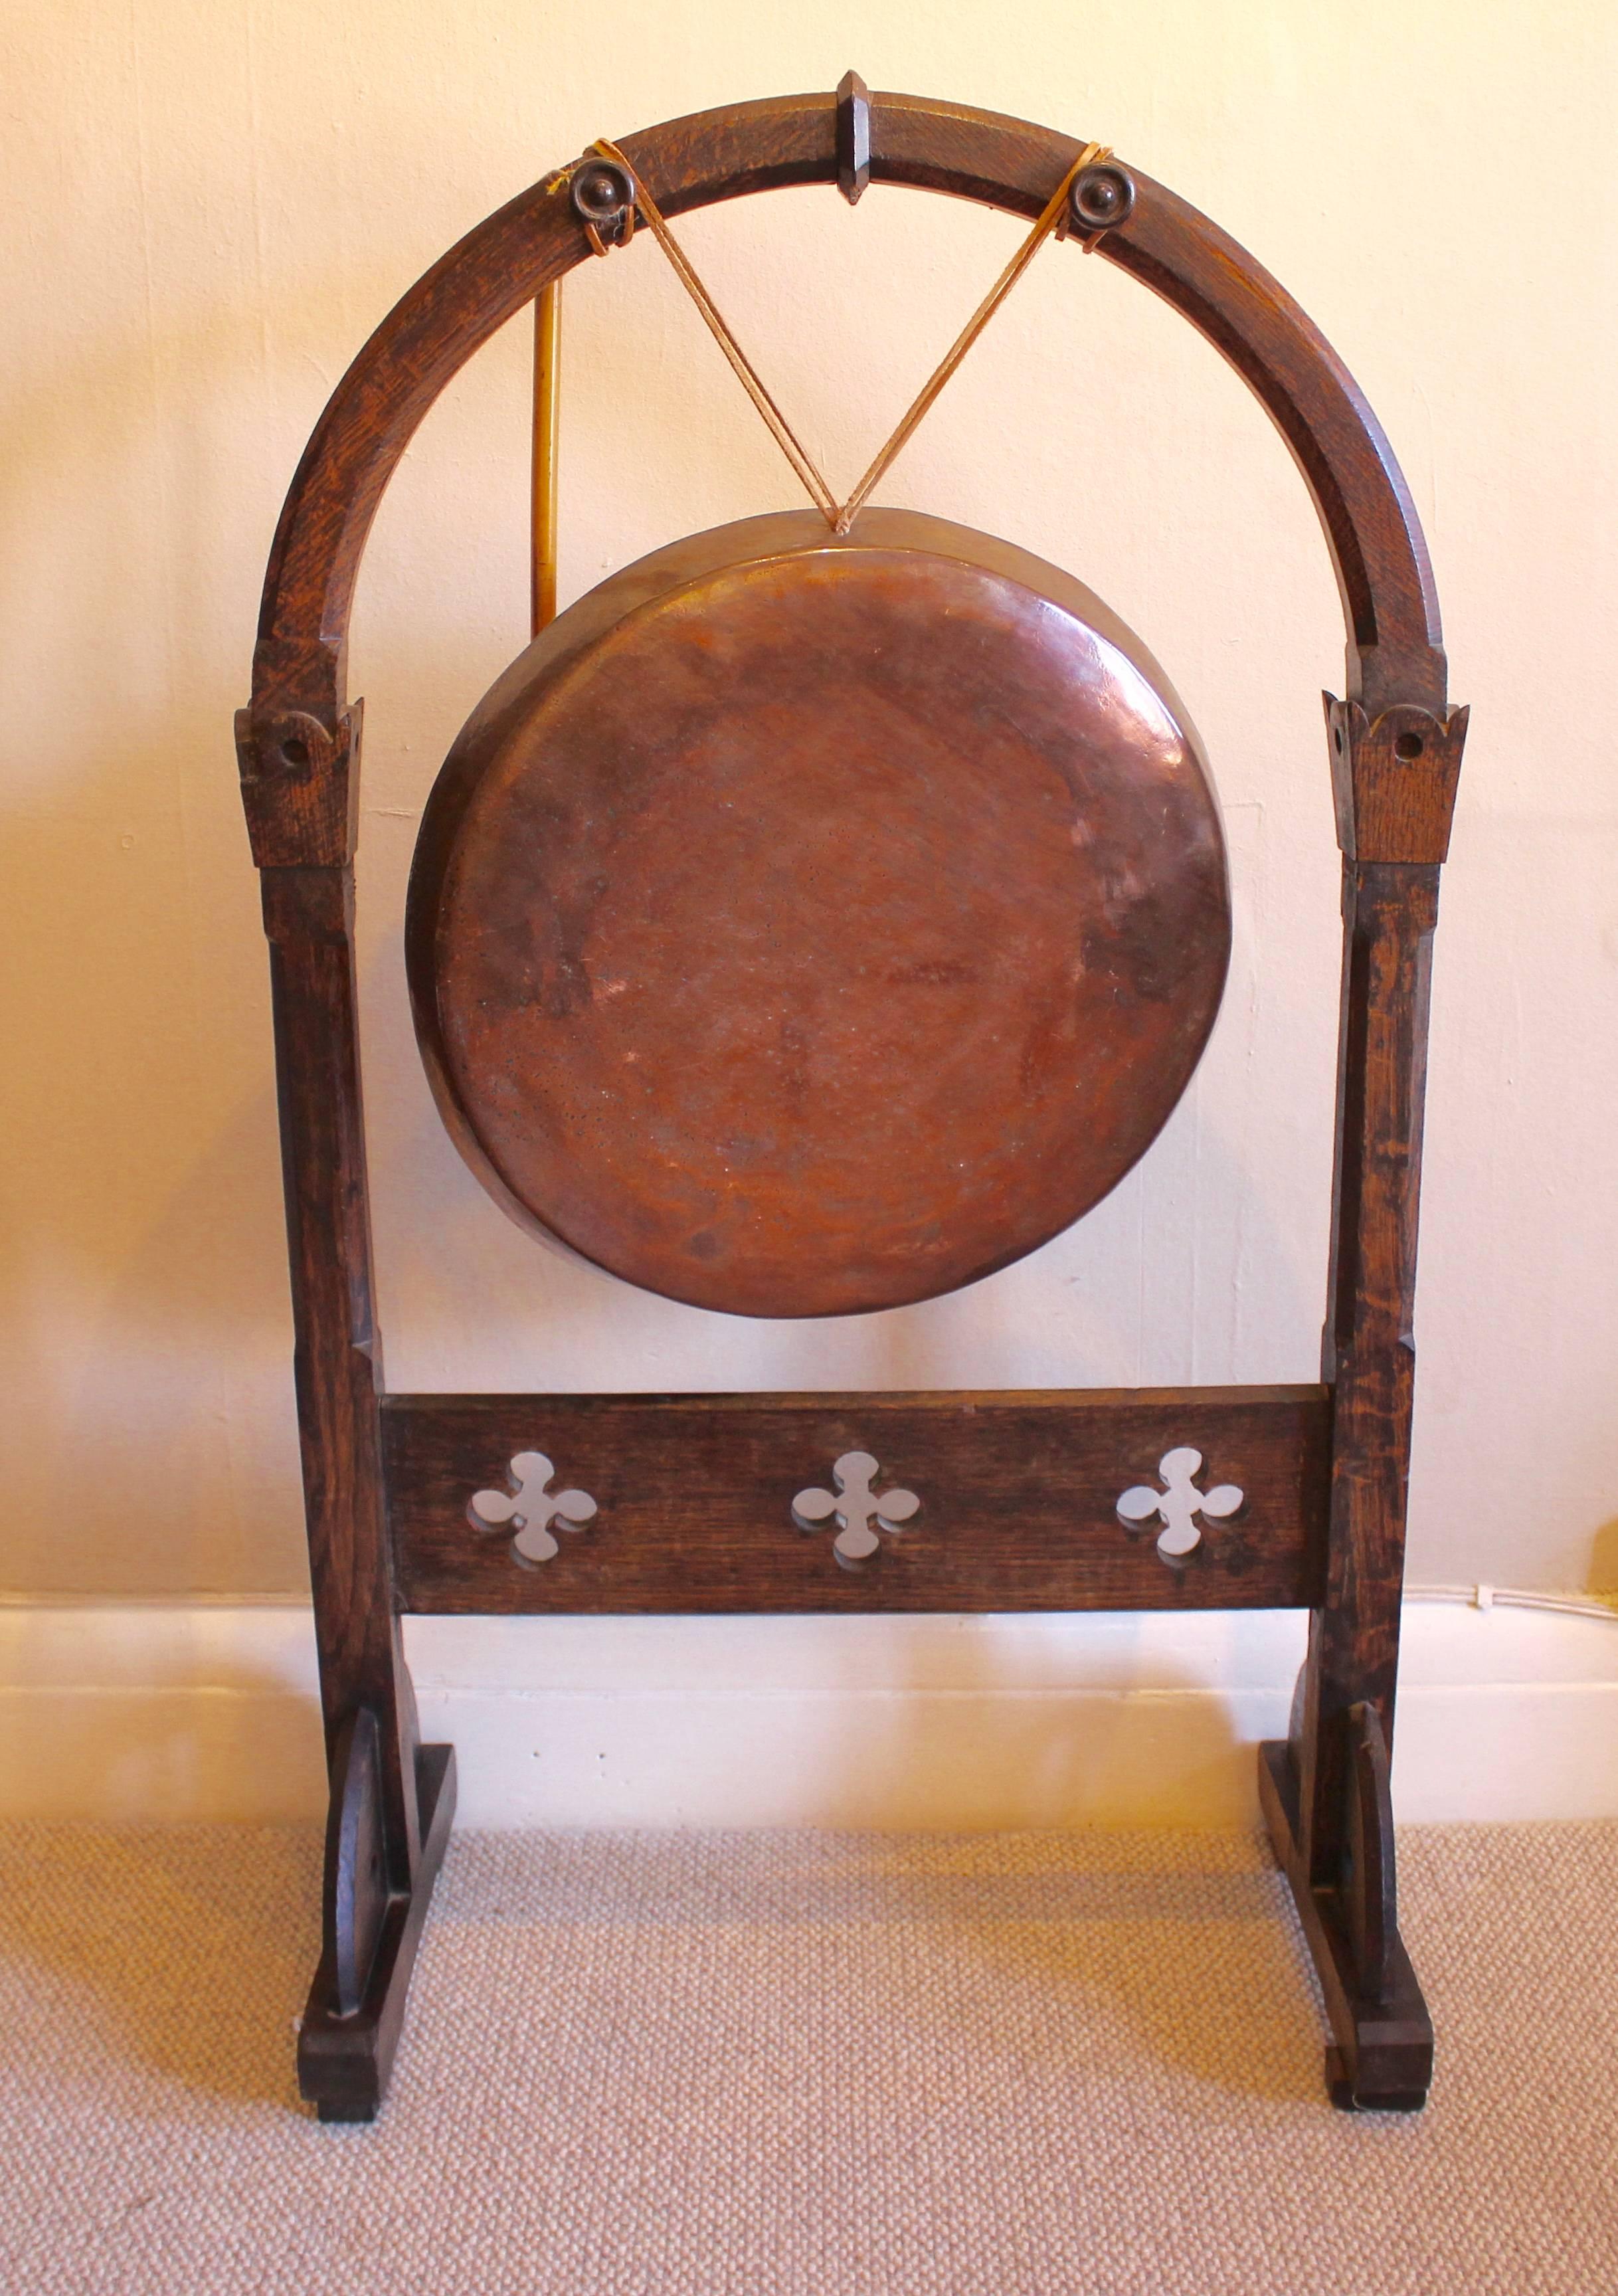 A large Victorian oak dinner gong with mallet. The large coppered bronze gong supported by leather ties to the arched oak frame. Having turned finials to support the gong. The foot of the arch is flanked by squared carvings above chamfered uprights